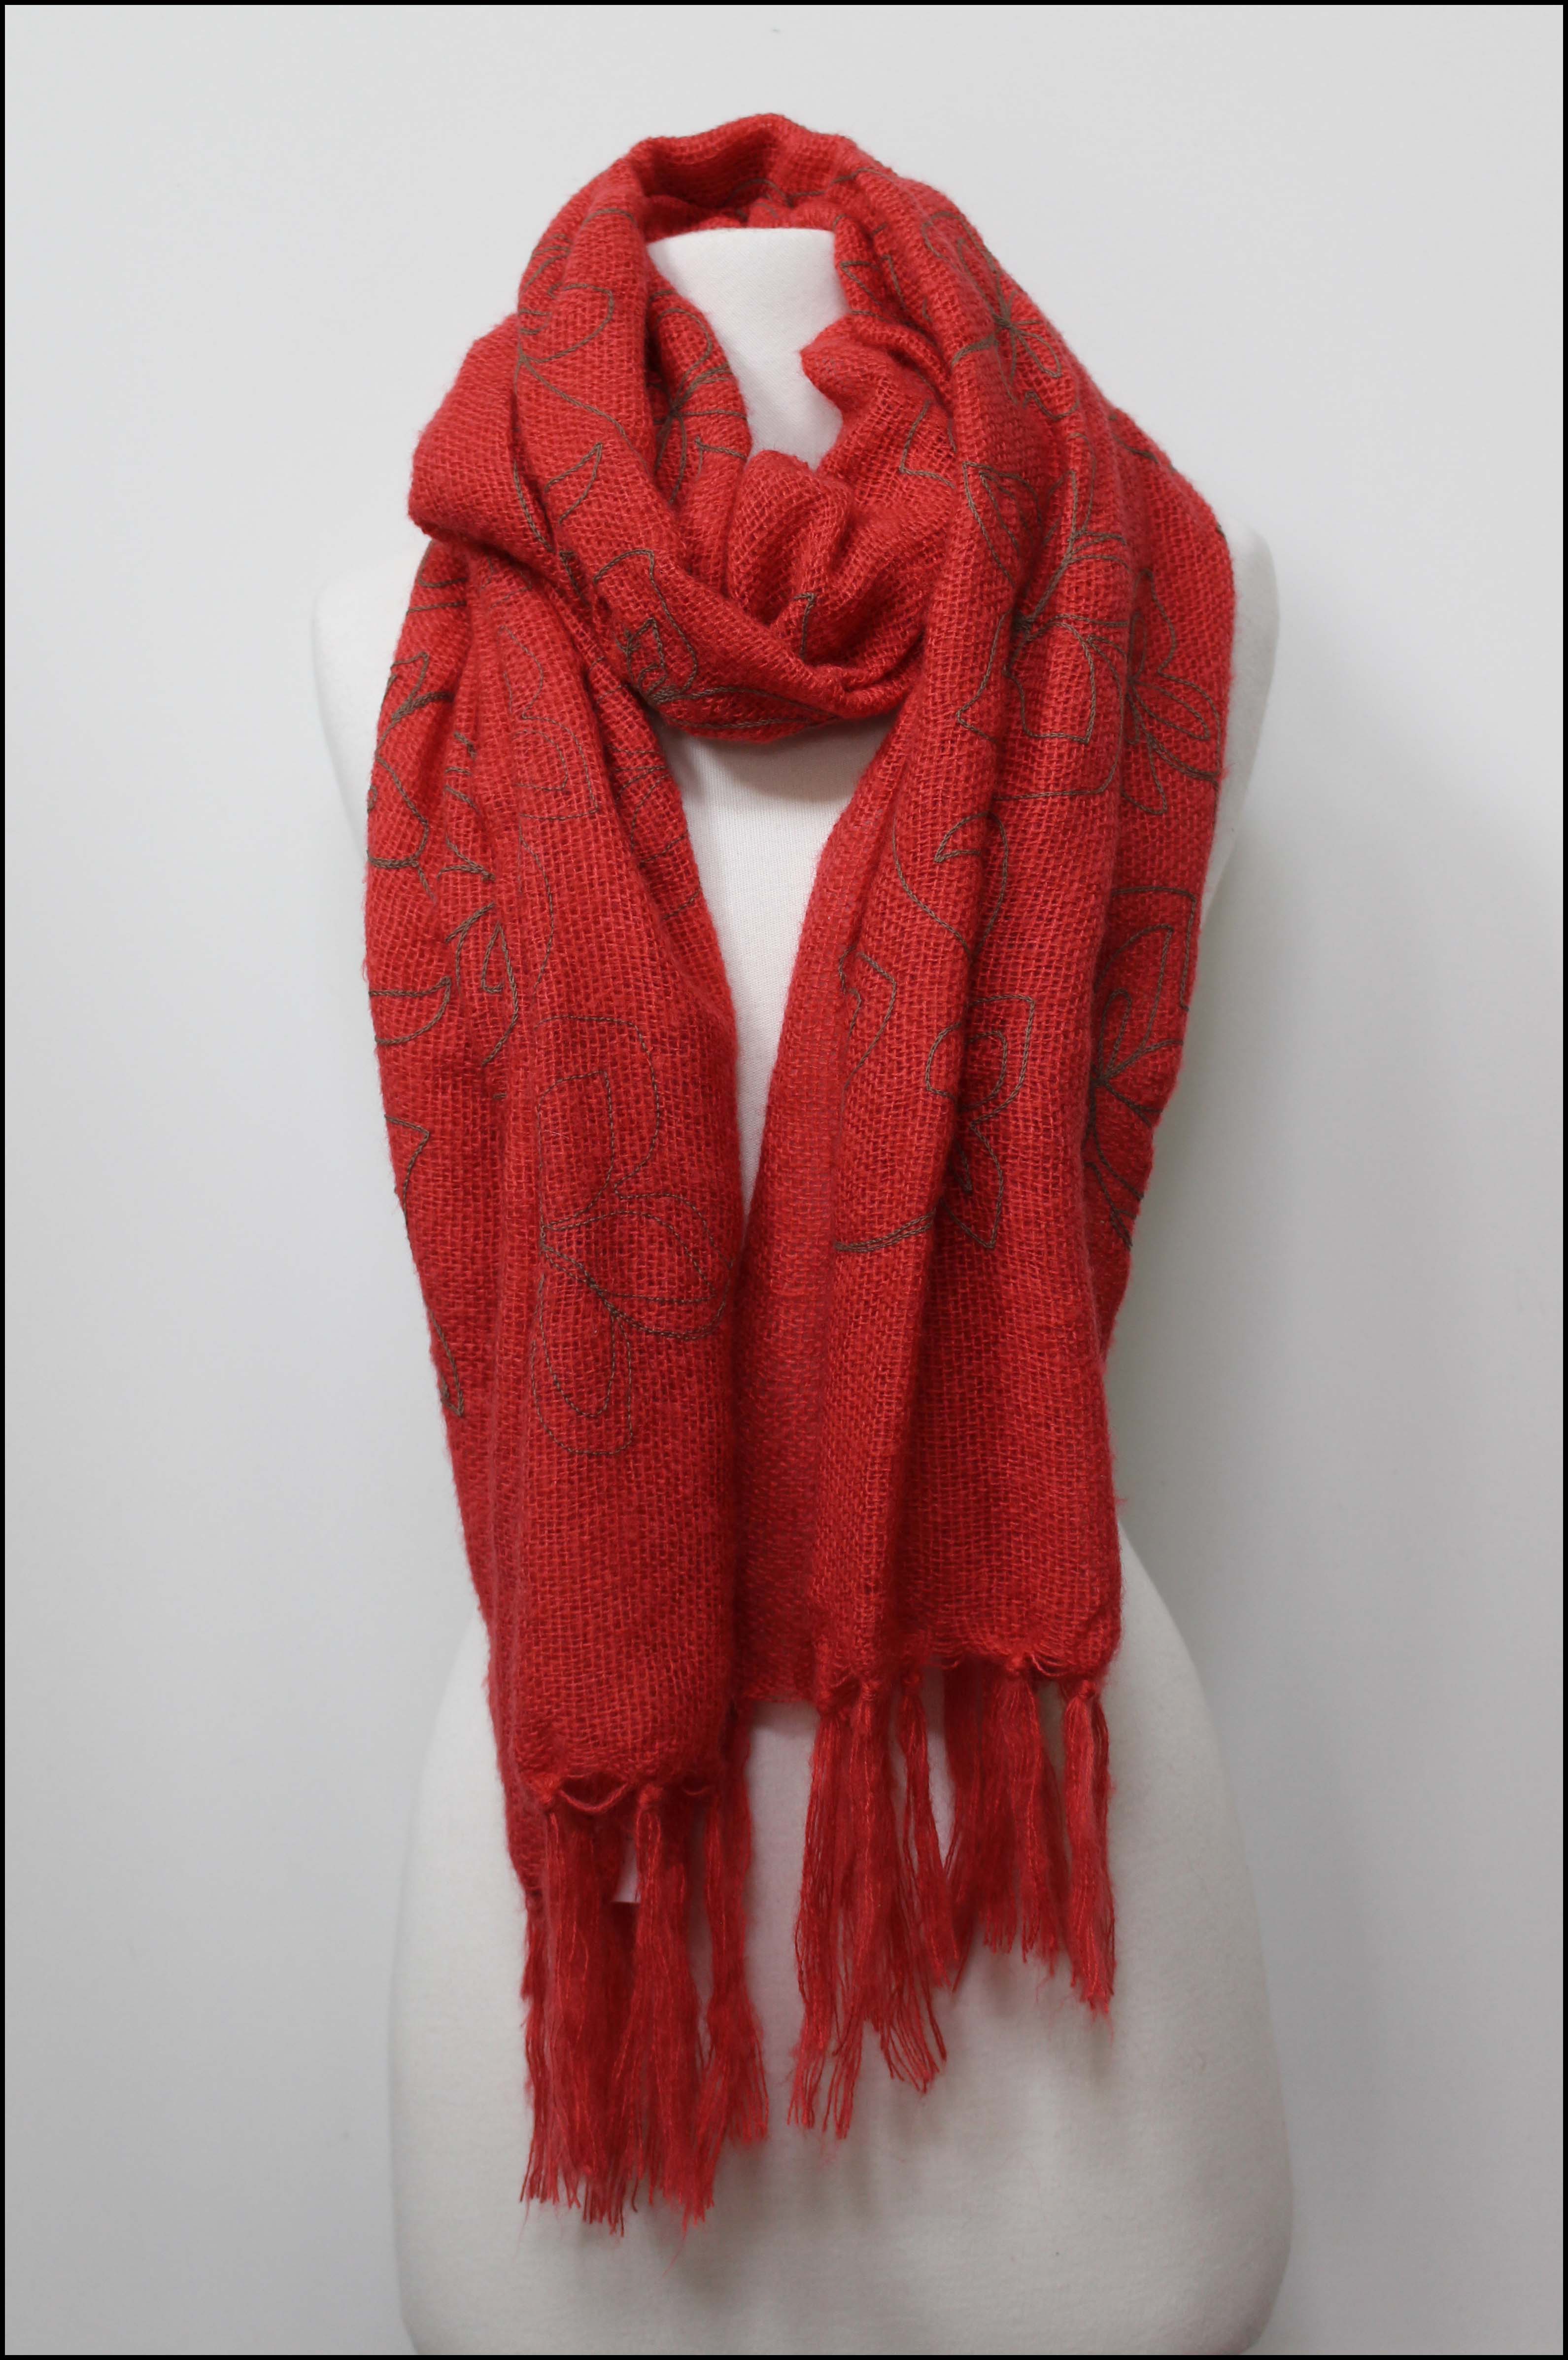 Warm Knit Scarf with Embroidered Floral-edged Patterns